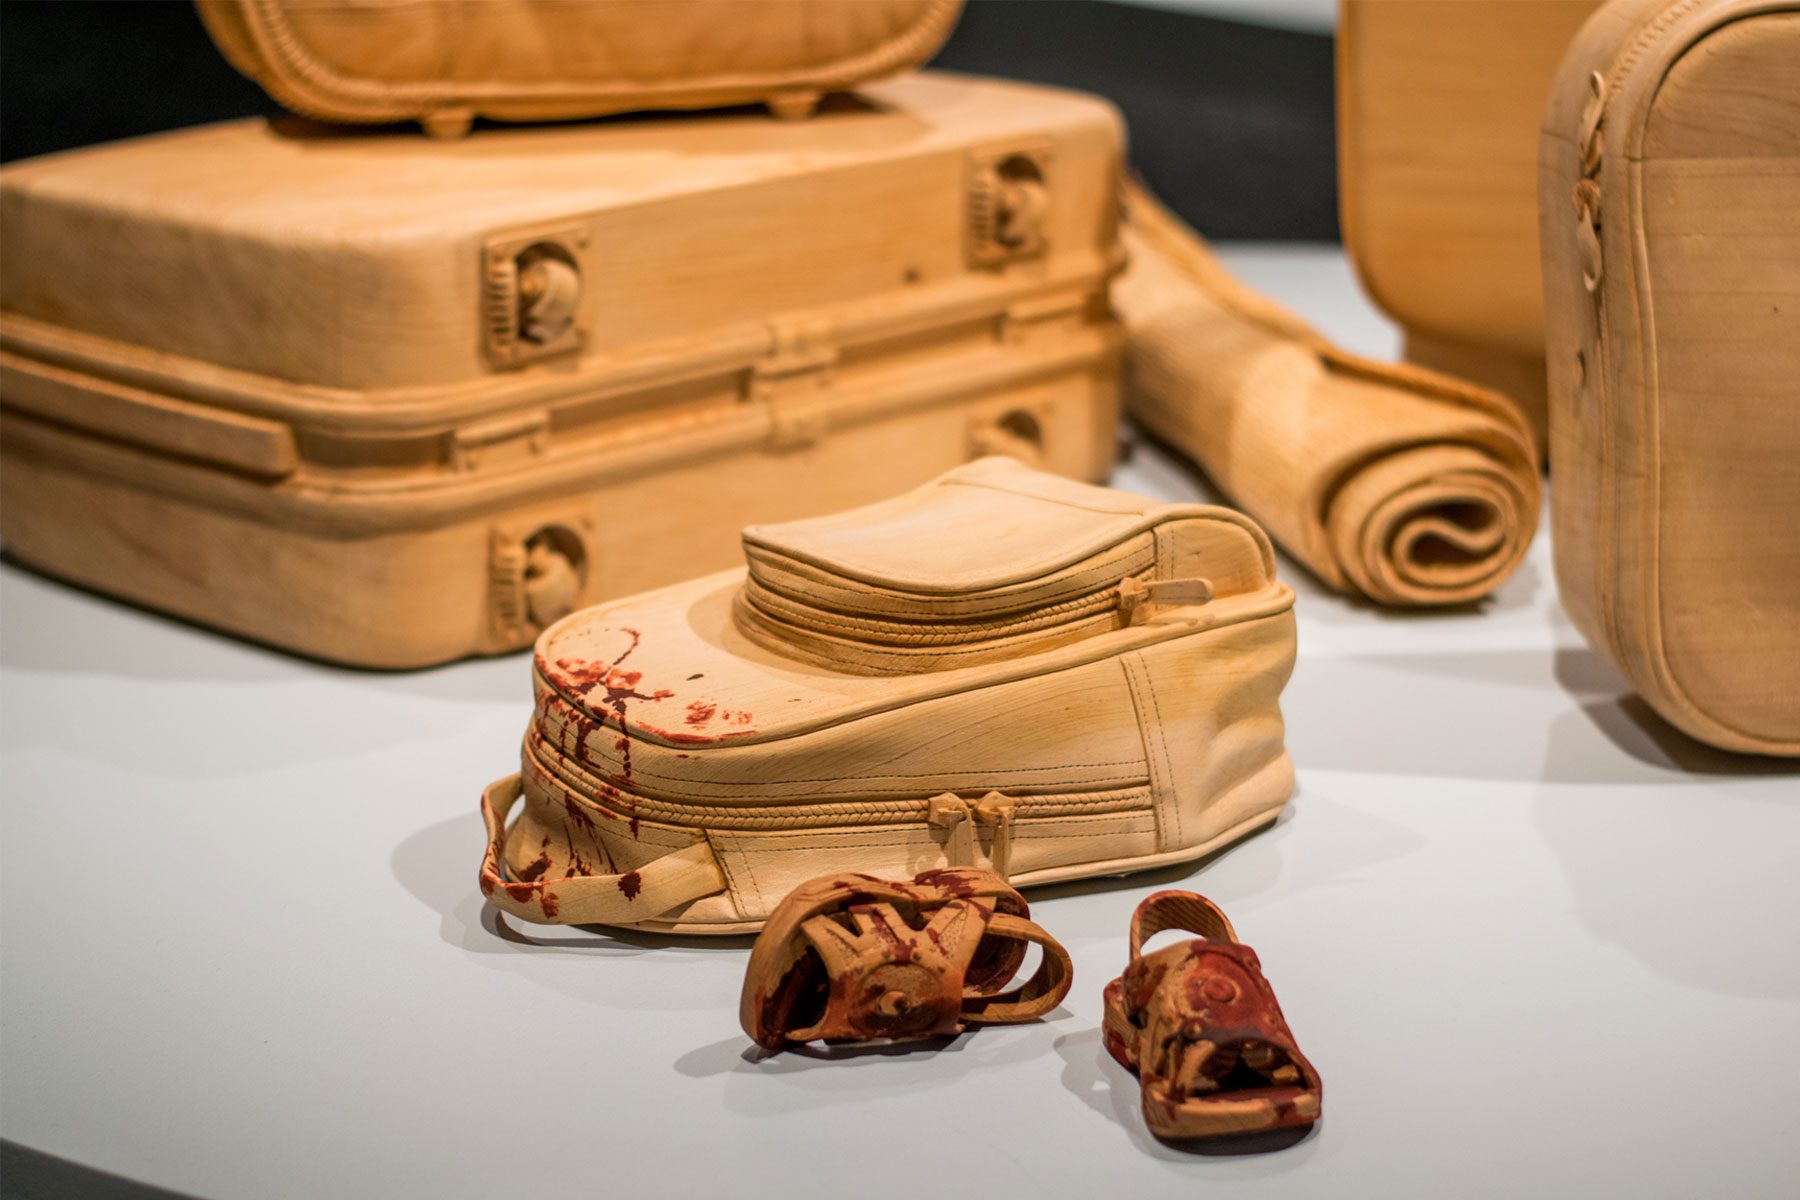 A collection of carved, wooden luggage with a pair of bloody children's shoes.